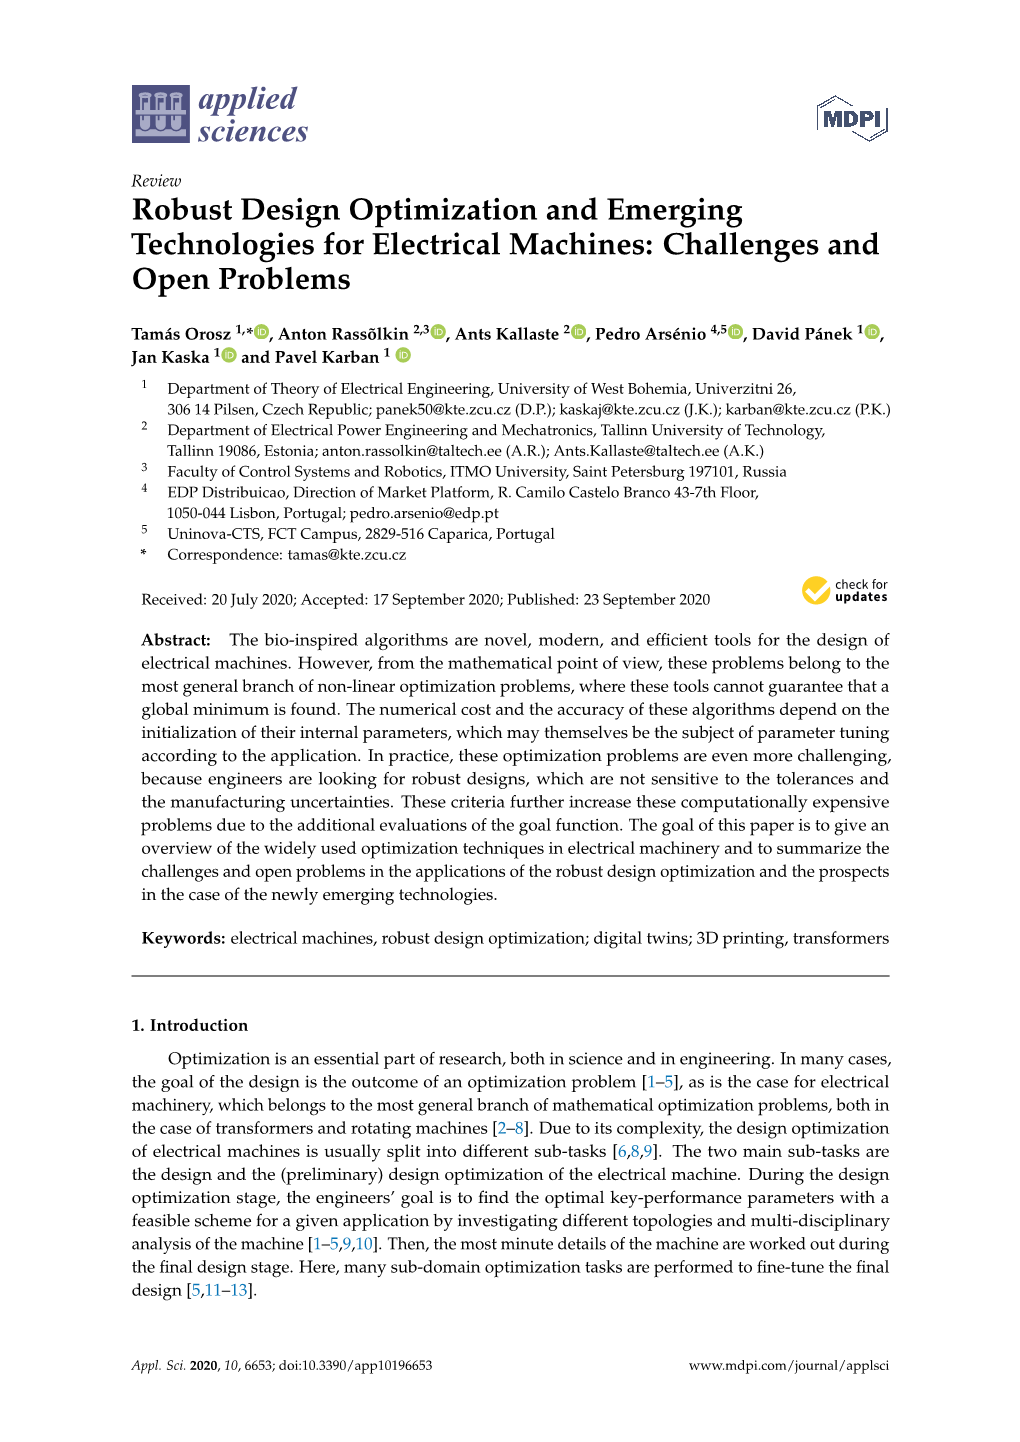 Robust Design Optimization and Emerging Technologies for Electrical Machines: Challenges and Open Problems